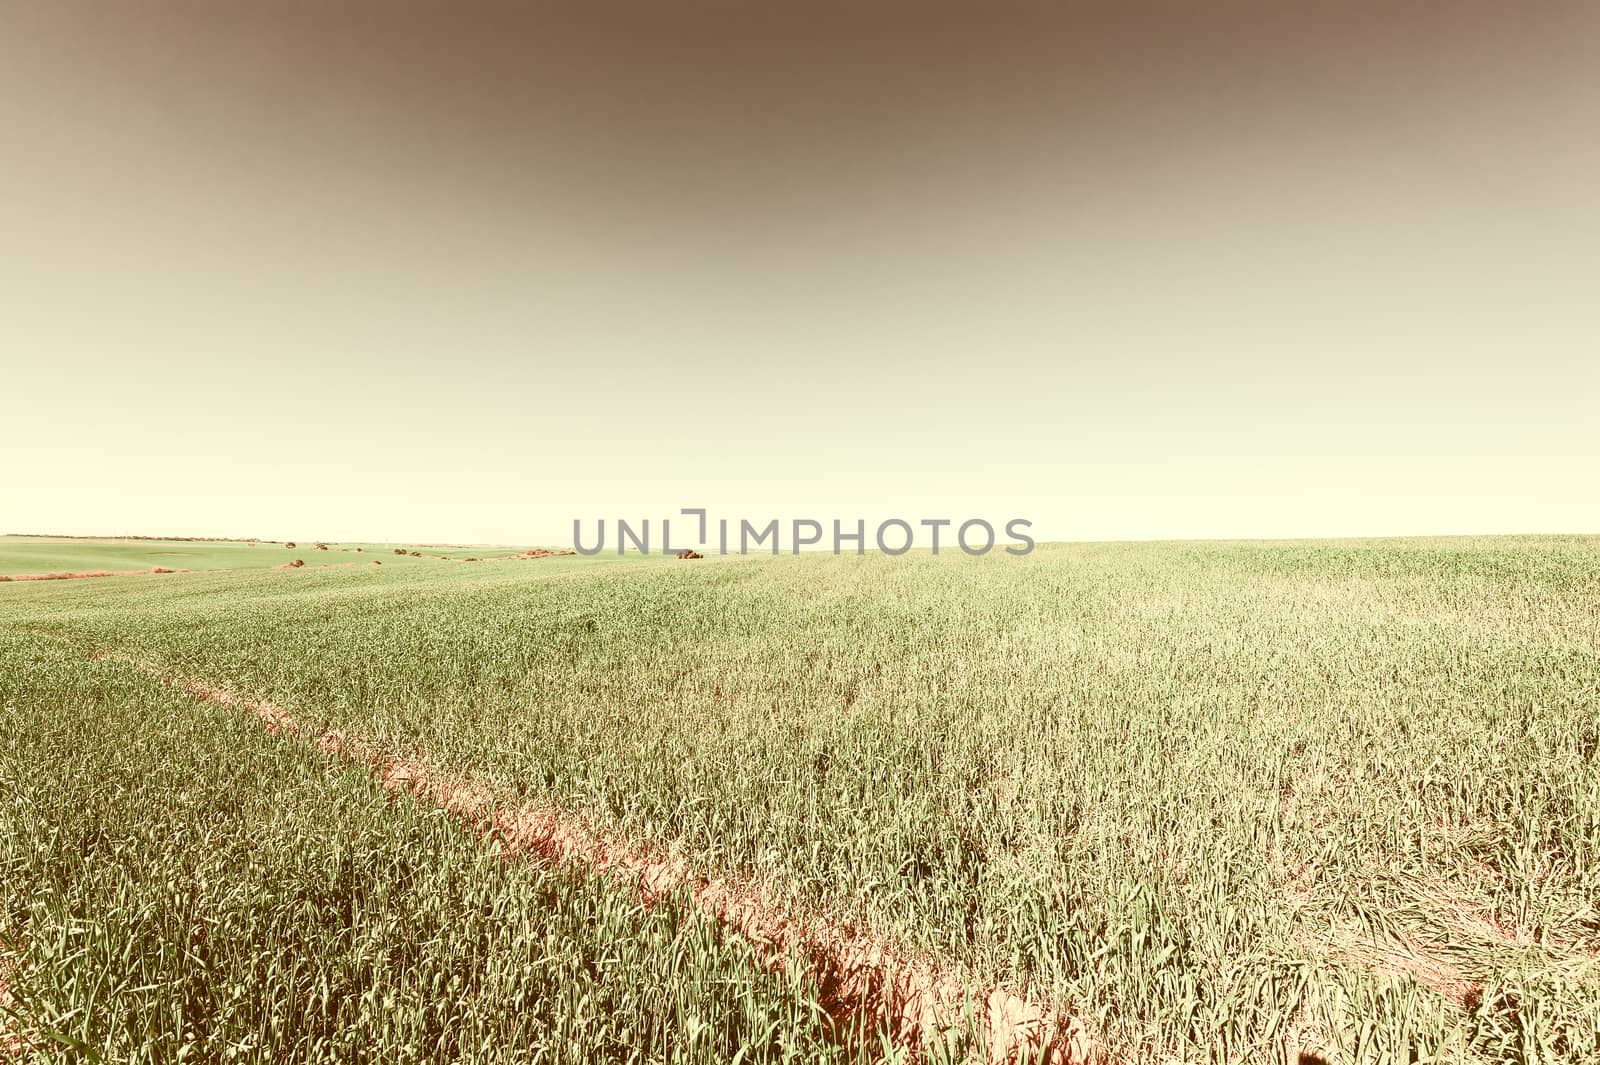 Green Field in Israel at Spring, Retro Image Filtered Style